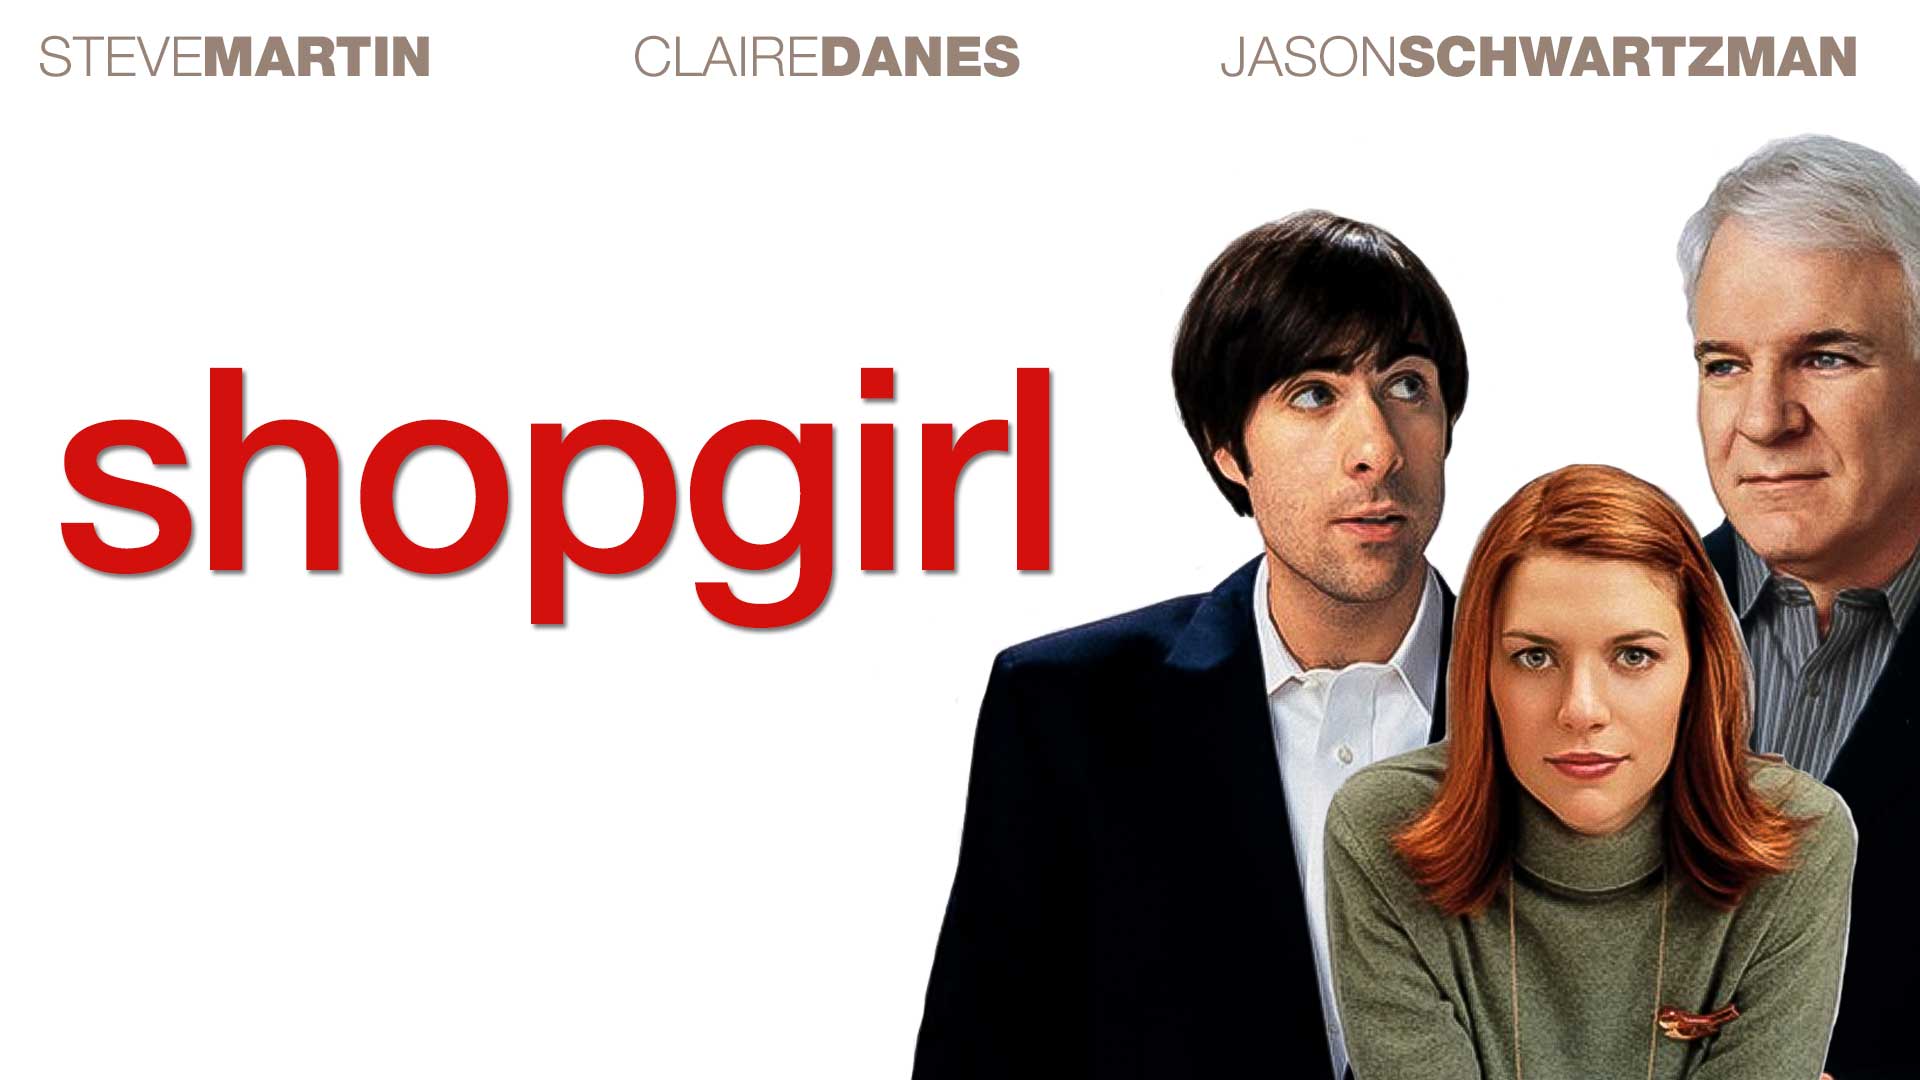 41-facts-about-the-movie-shopgirl